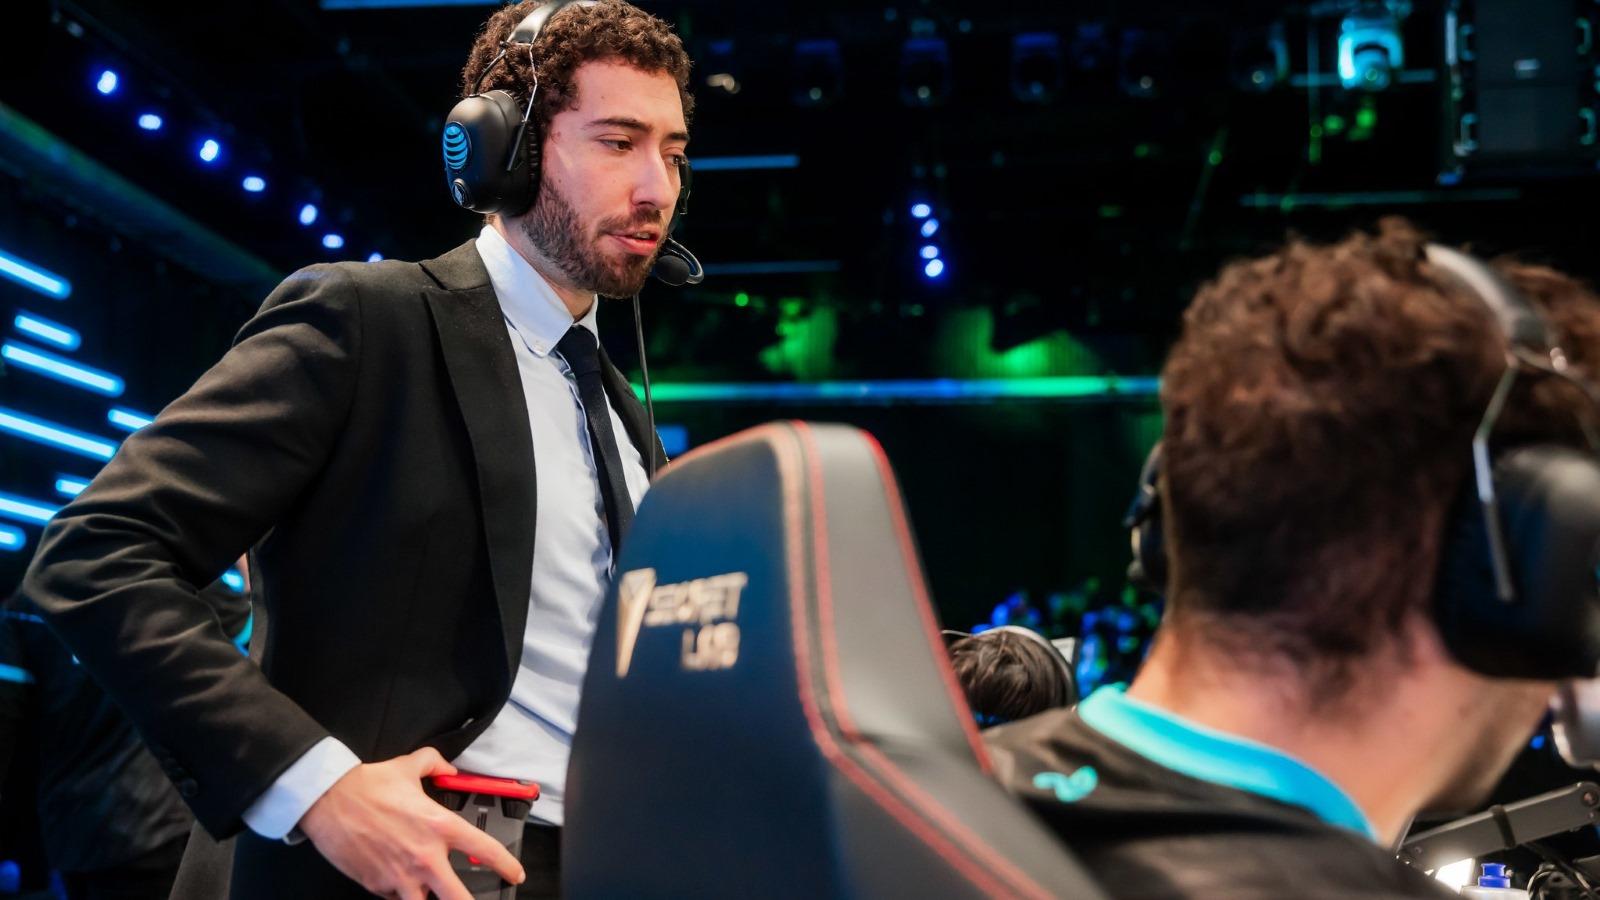 Cloud9 mithy leaves LCS super team